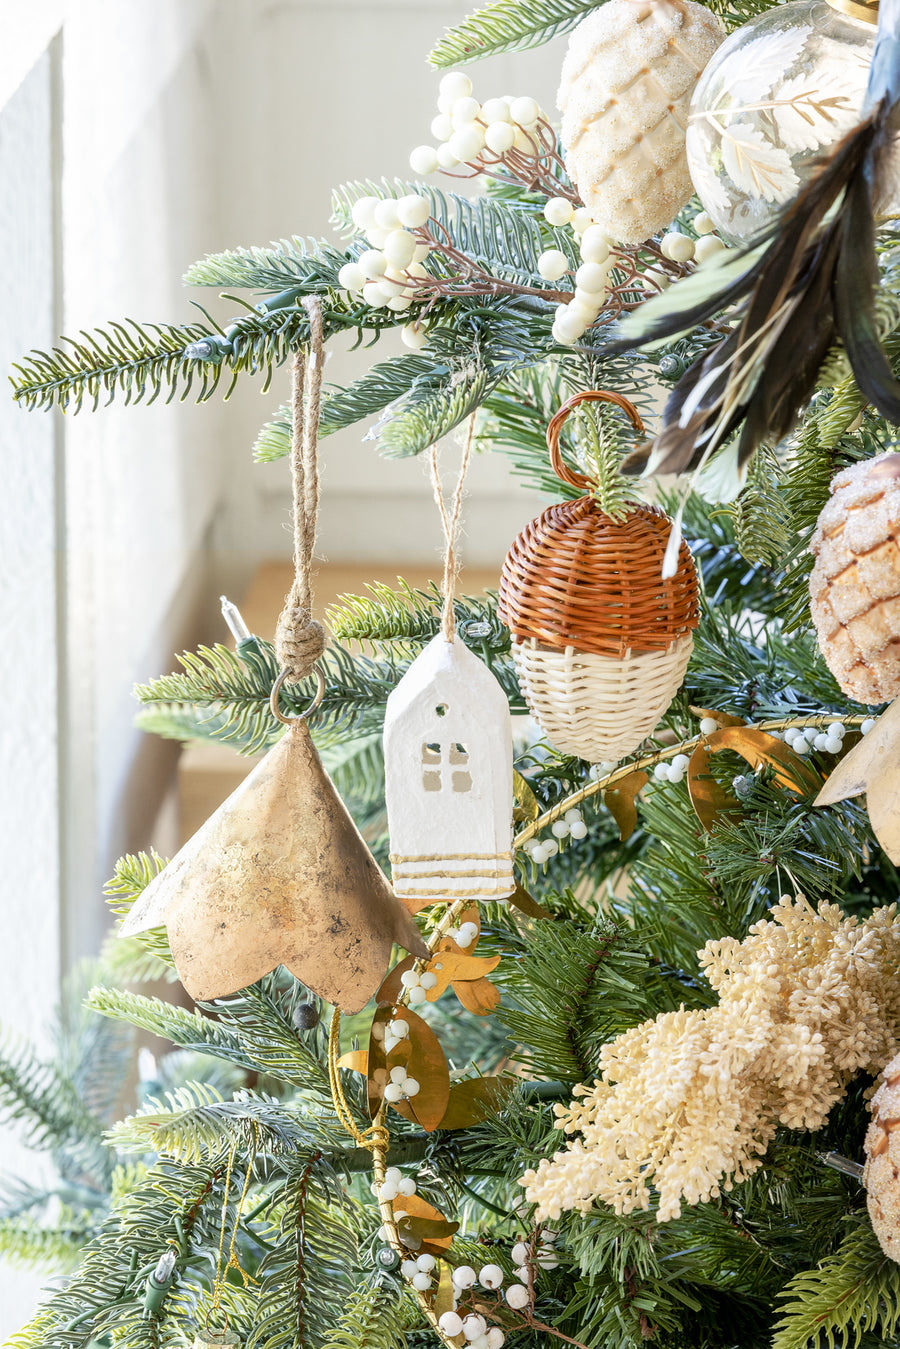 Distressed Gold Scalloped Metal Bell Ornament